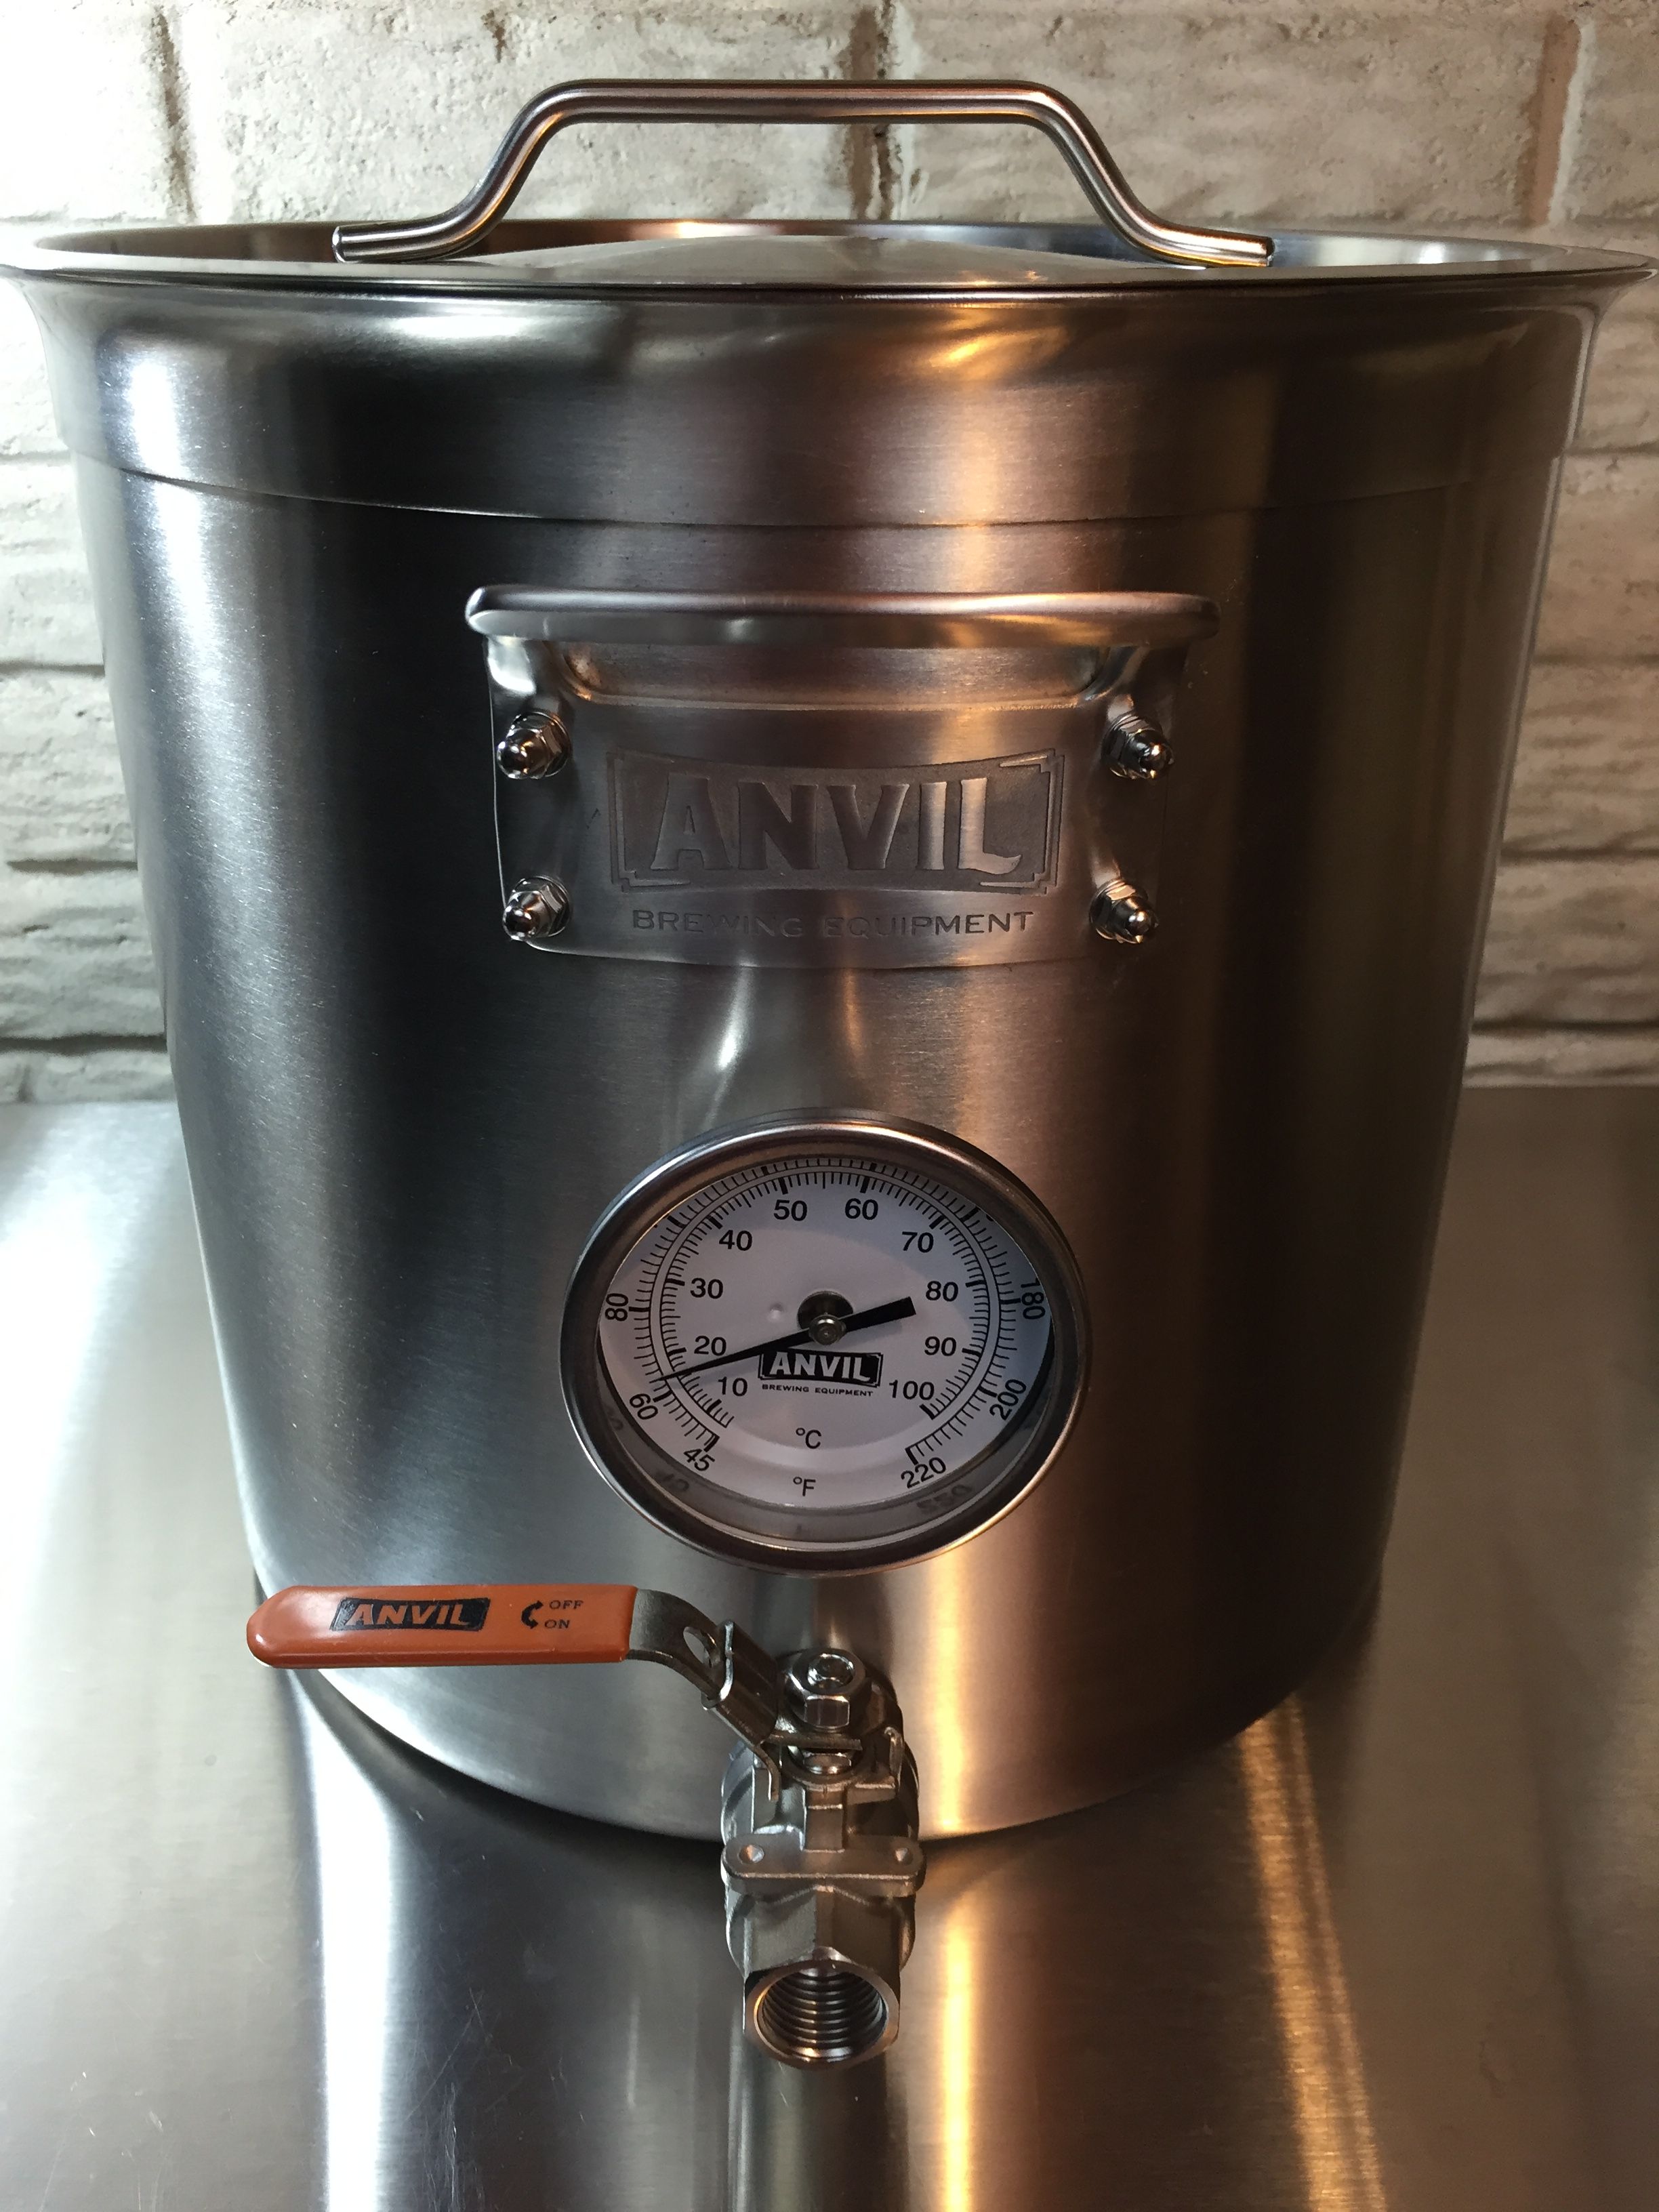 Hands On Review: Anvil Brewing Equipment Brew Kettle